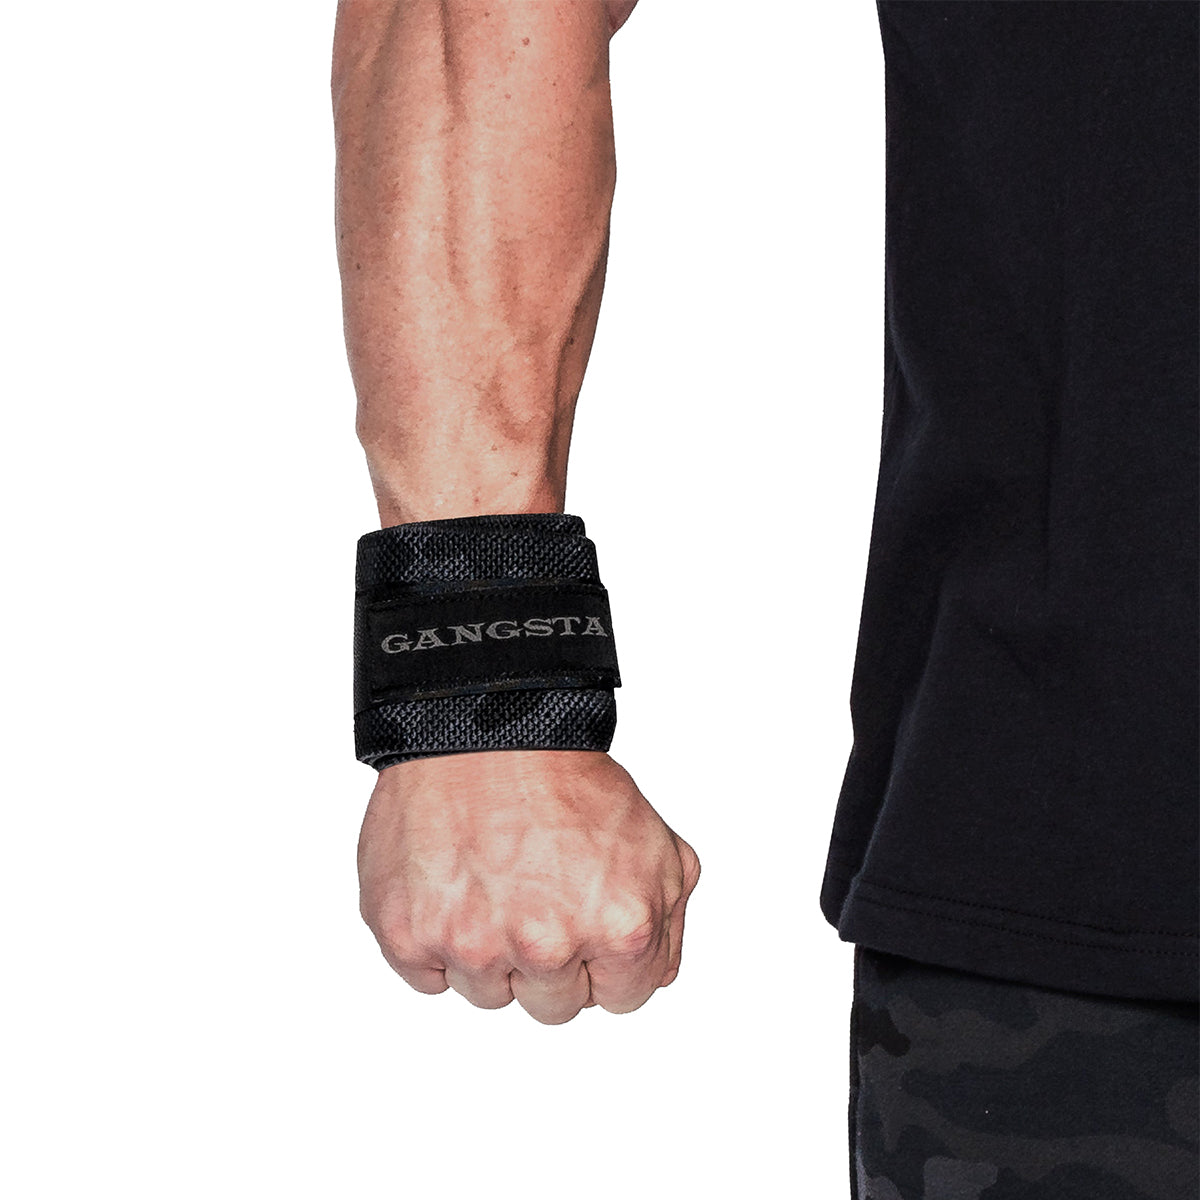 Sling Shot Gangsta Wrist Wraps by Mark Bell, IPF approved weight lifting support Sling Shot